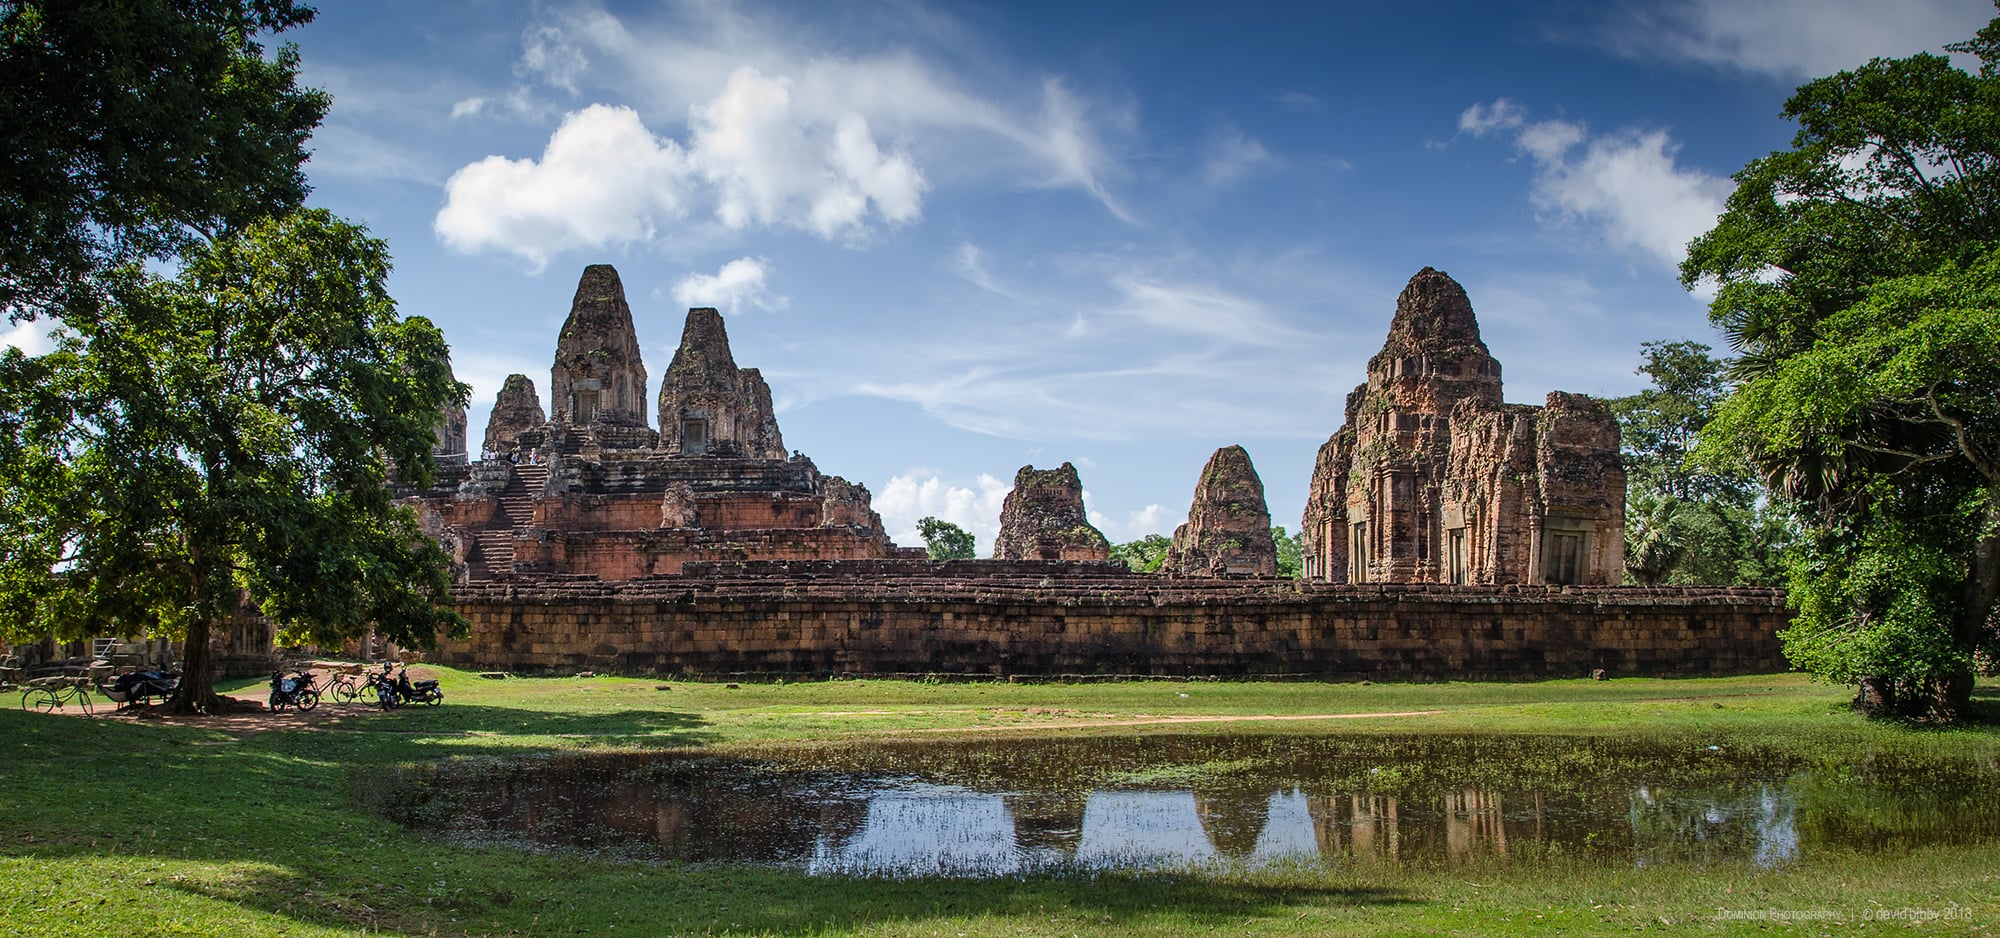   Pre Rup  - 10th century temple. Angkor, Siem Reap Province, Cambodia. 